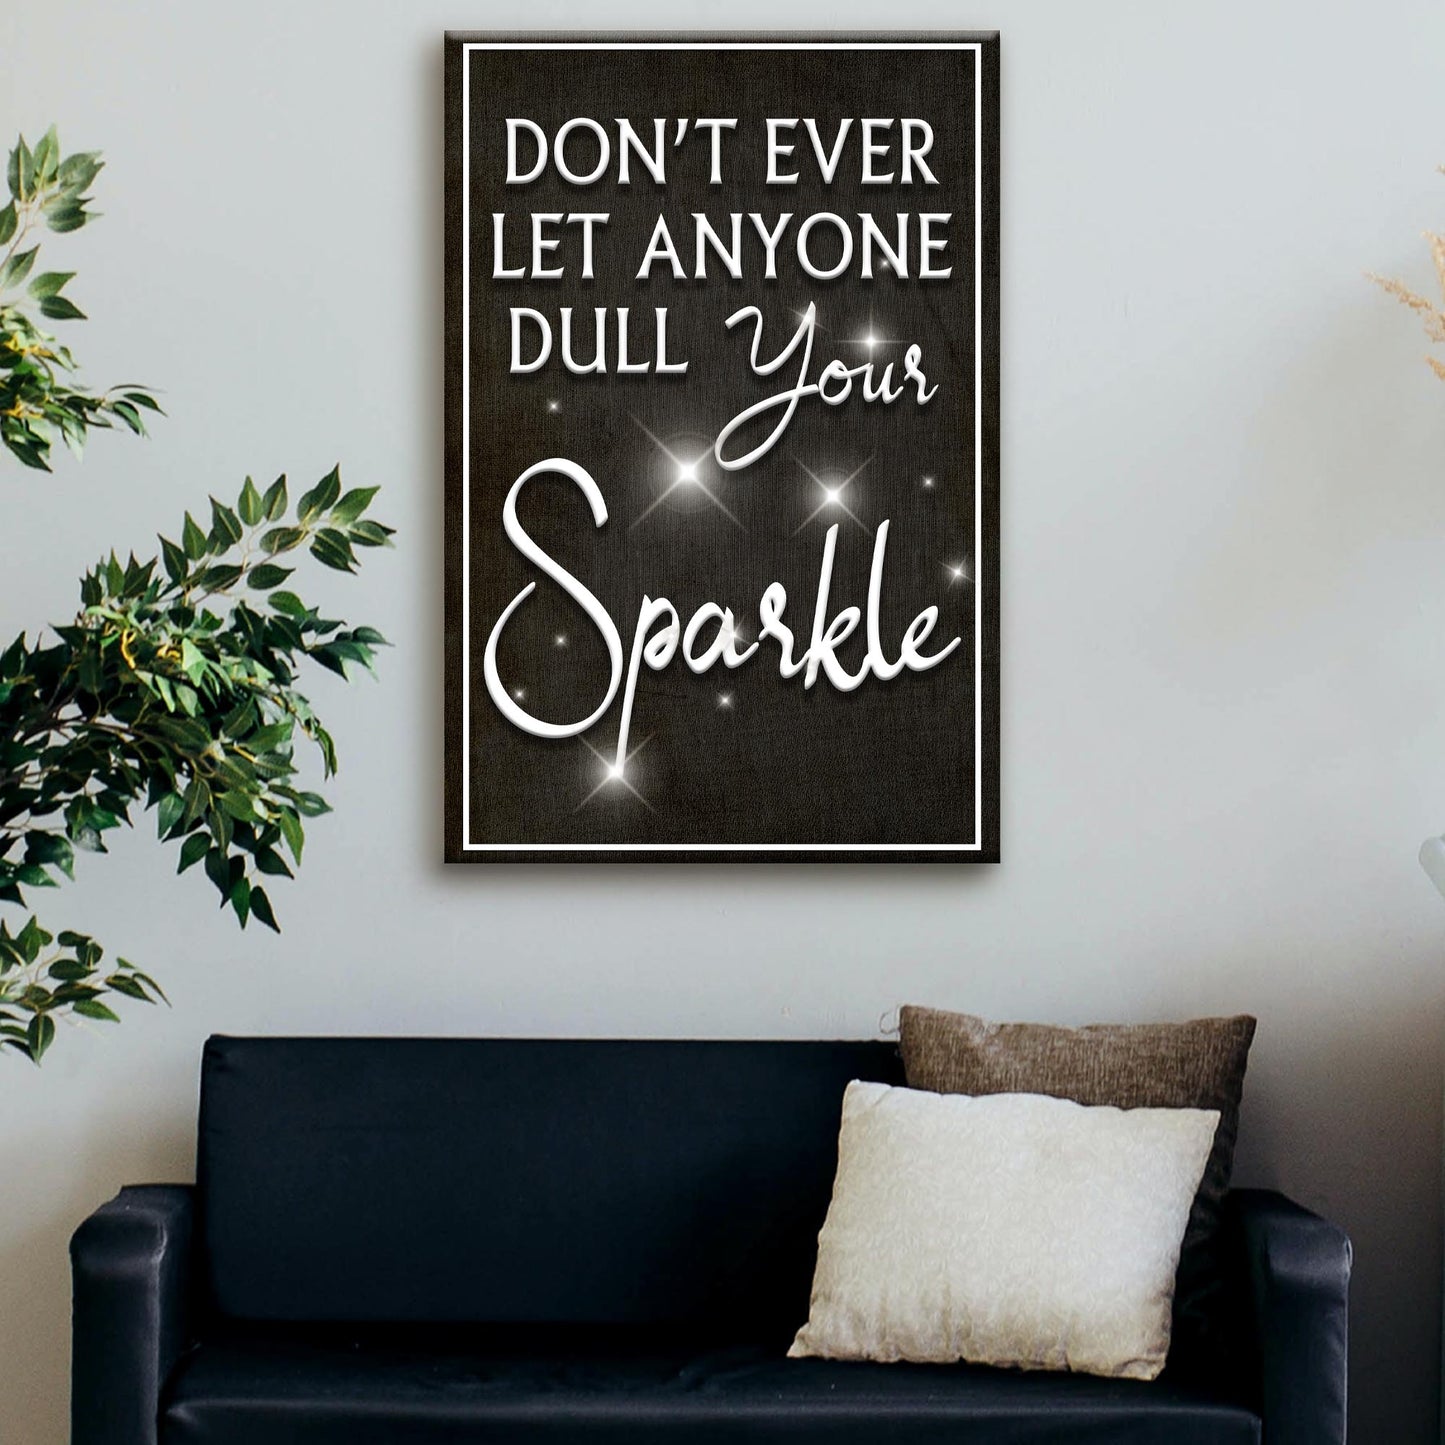 Don't Ever Let Anyone Dull Your Sparkle Sign II - Image by Tailored Canvases